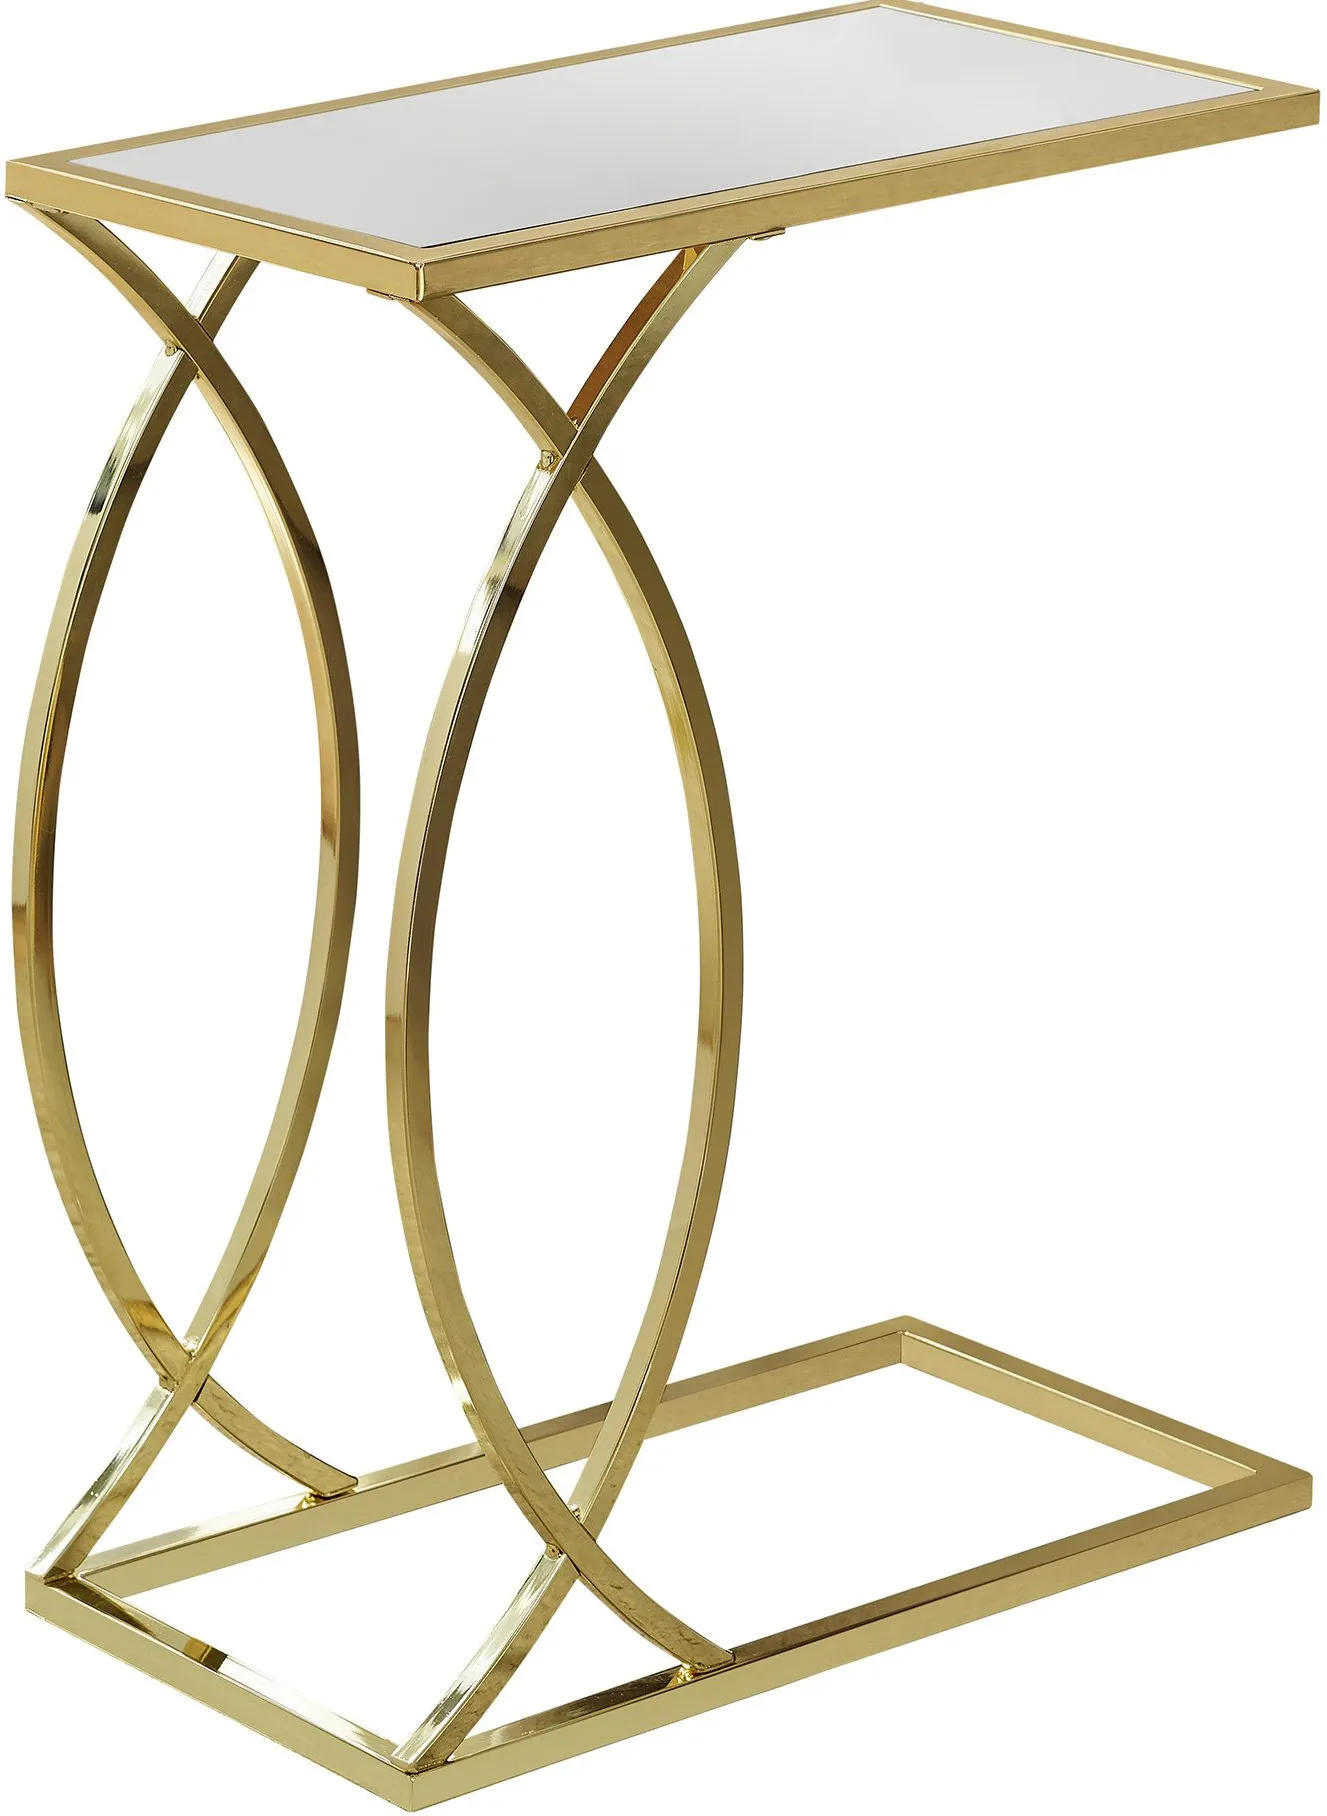 Accent Table, C-Shaped, End, Side, Snack, Living Room, Bedroom, Metal, Laminate, Mirror, Gold, Contemporary, Modern